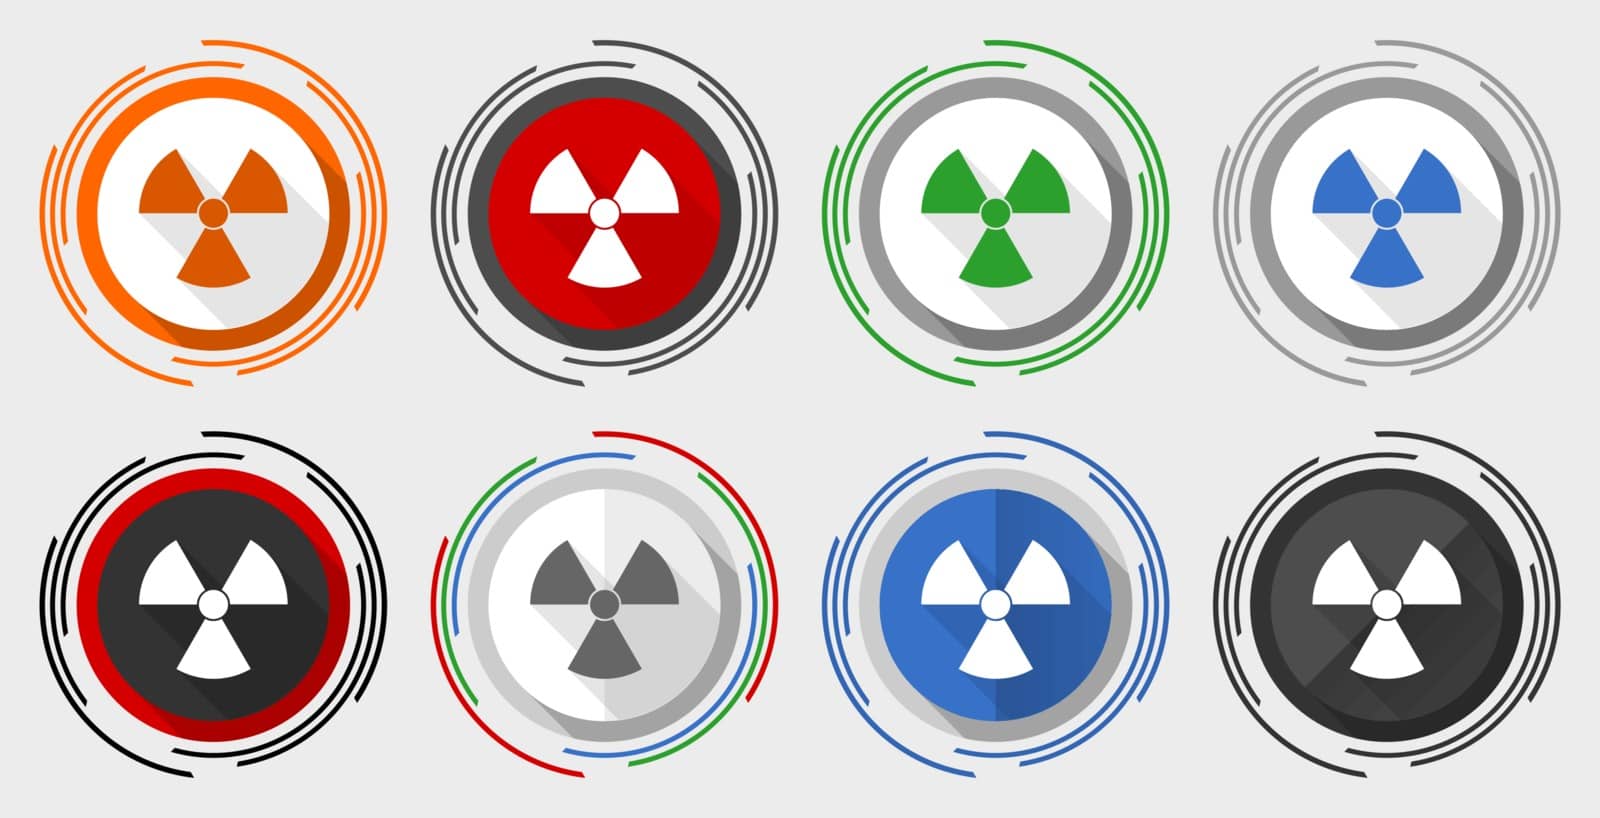 Radiation vector icon set, modern design flat graphic in 8 options for web design and mobile applications by alexwhite